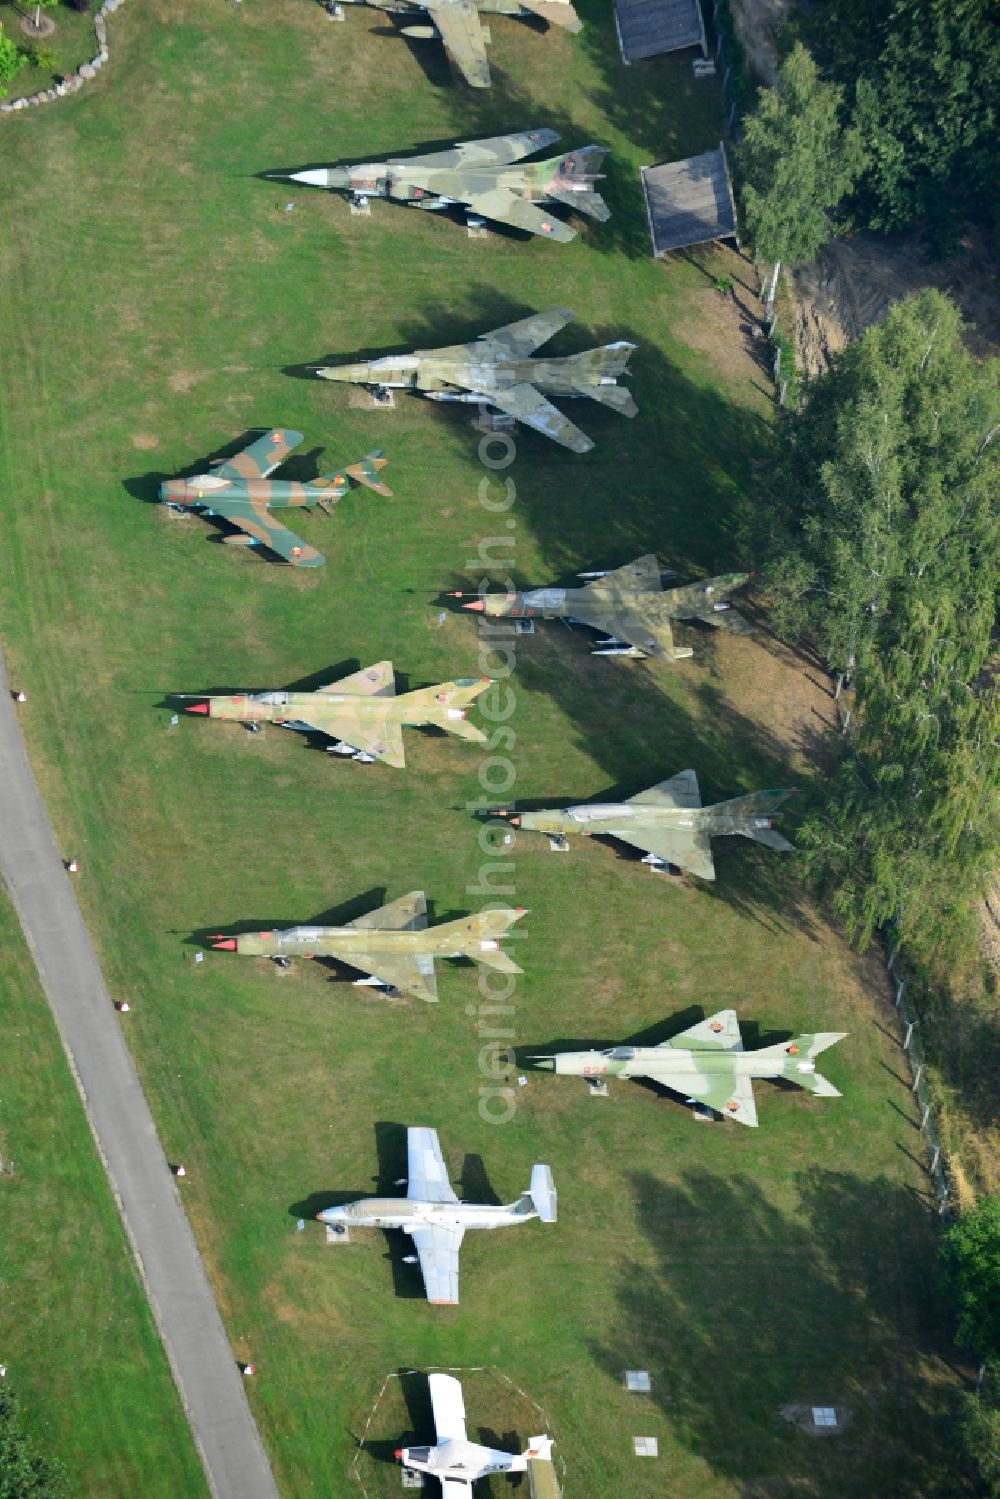 Aerial photograph Cottbus - View of the Airfield Museum on the site of the former airfield Cottbus. Covering an area of 20,000 square meters military aircrafts, agricultural aircraft and helicopters and also air traffic control and vehicle technology from the history of aviation are shown. All periods are presented in detail in the museum's images and documents